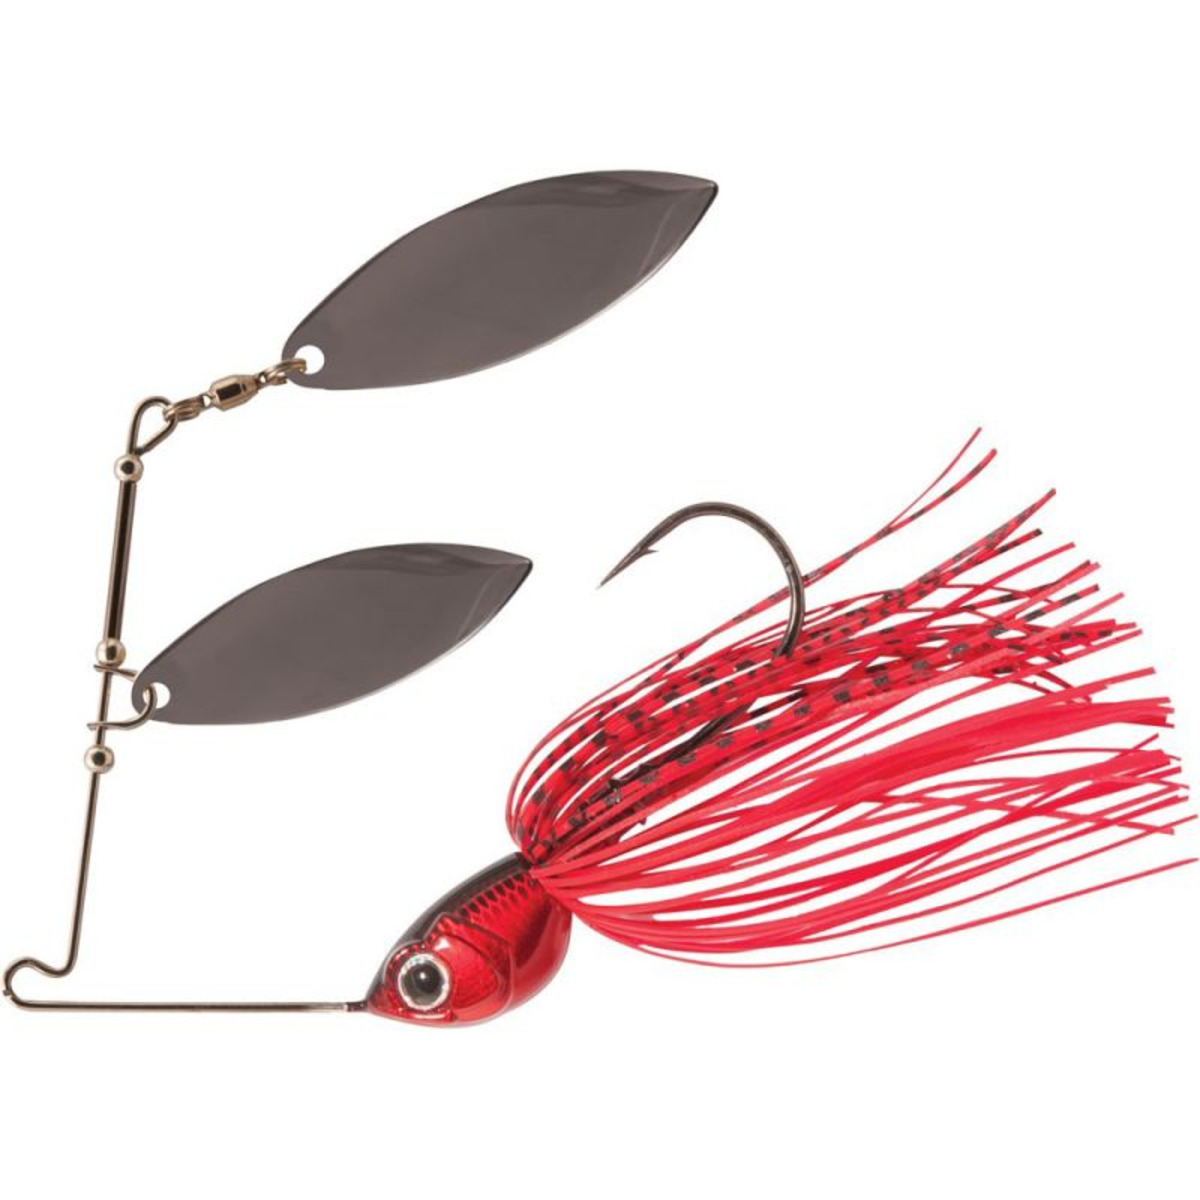 Rapture Sharp Spin Double Willow - 21.0 g - Red Hot